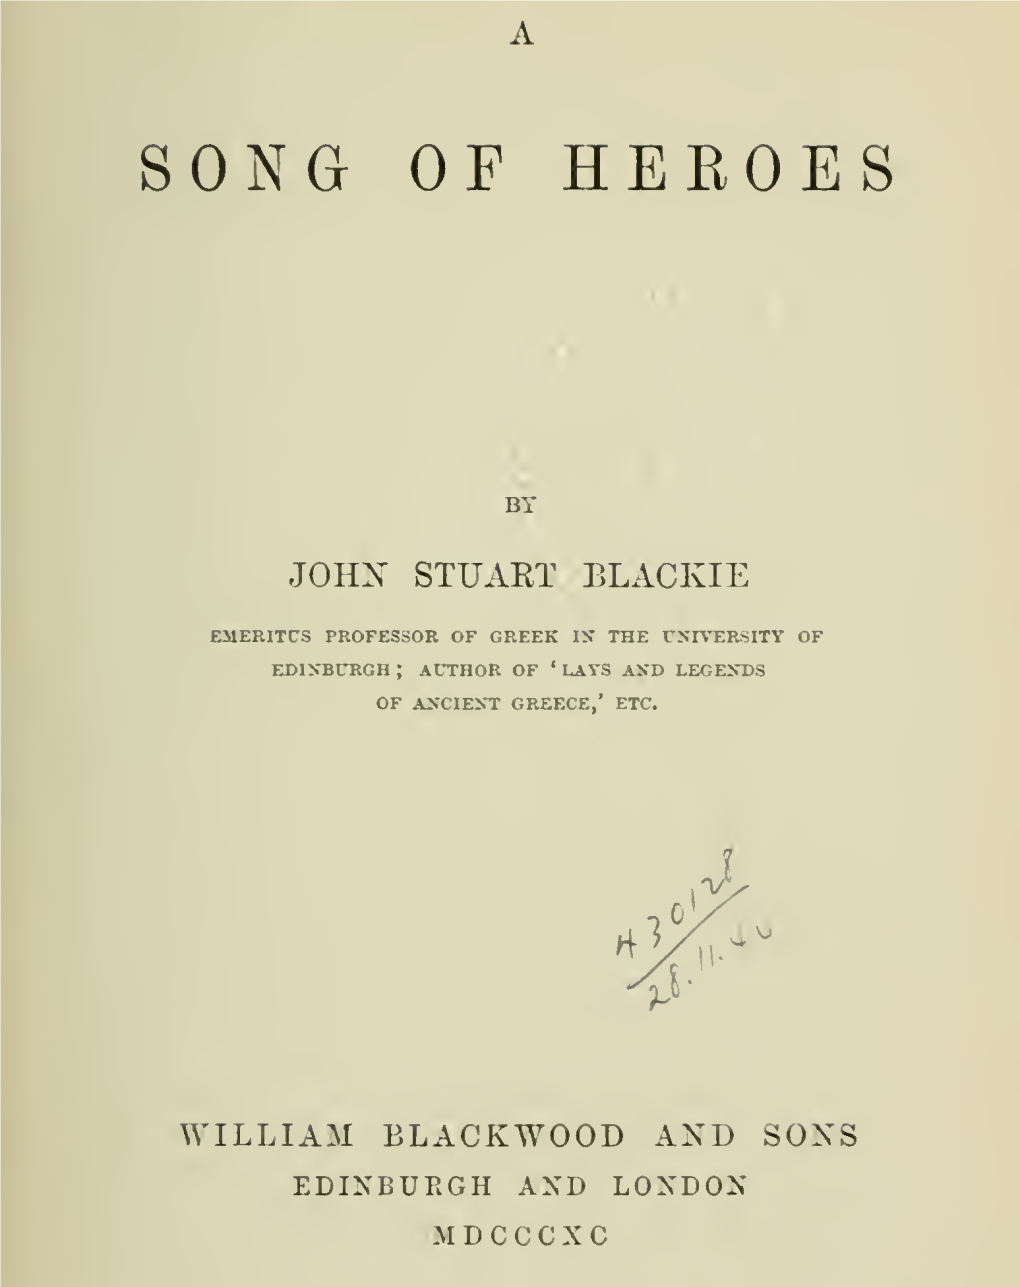 A Song of Heroes